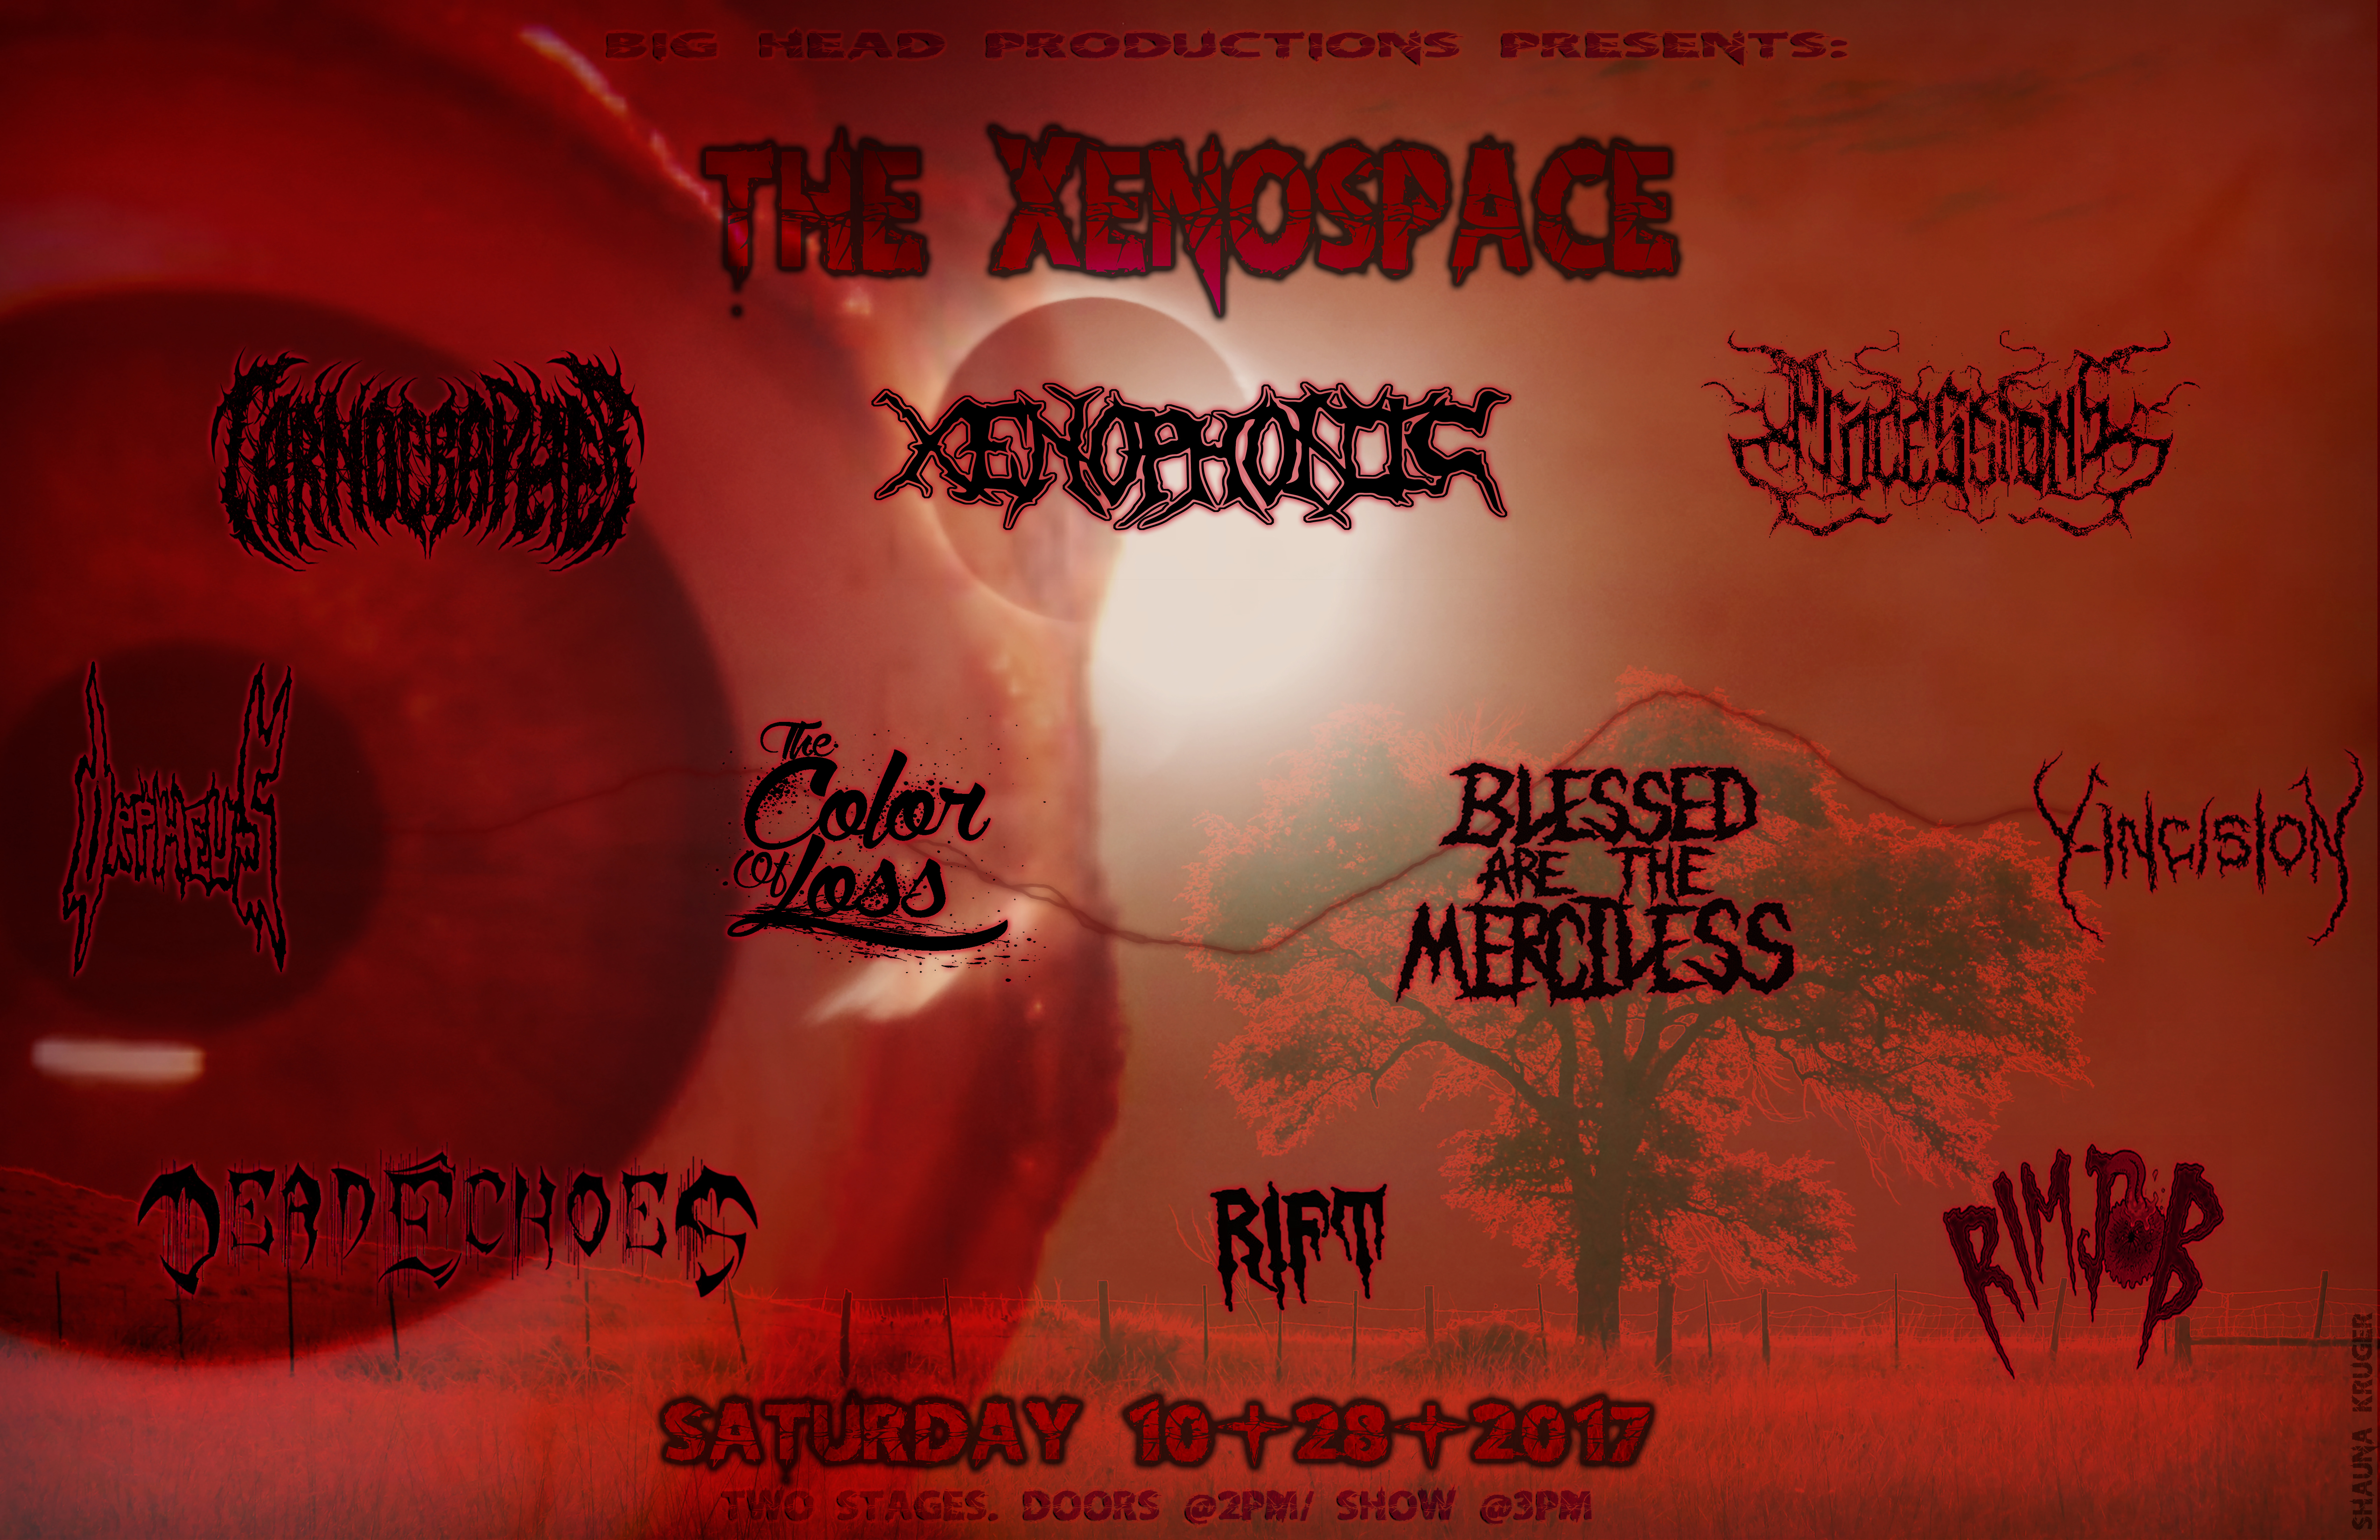 Xenoween, Xenospace, Big Head Productions, Xenophonic, Carnographer, Orpheus, Processions, Deadechoes, Y-Incision, Rift, Blessed Are the Merciless, Rimjob, House Show, flyer, Shauna Kruger